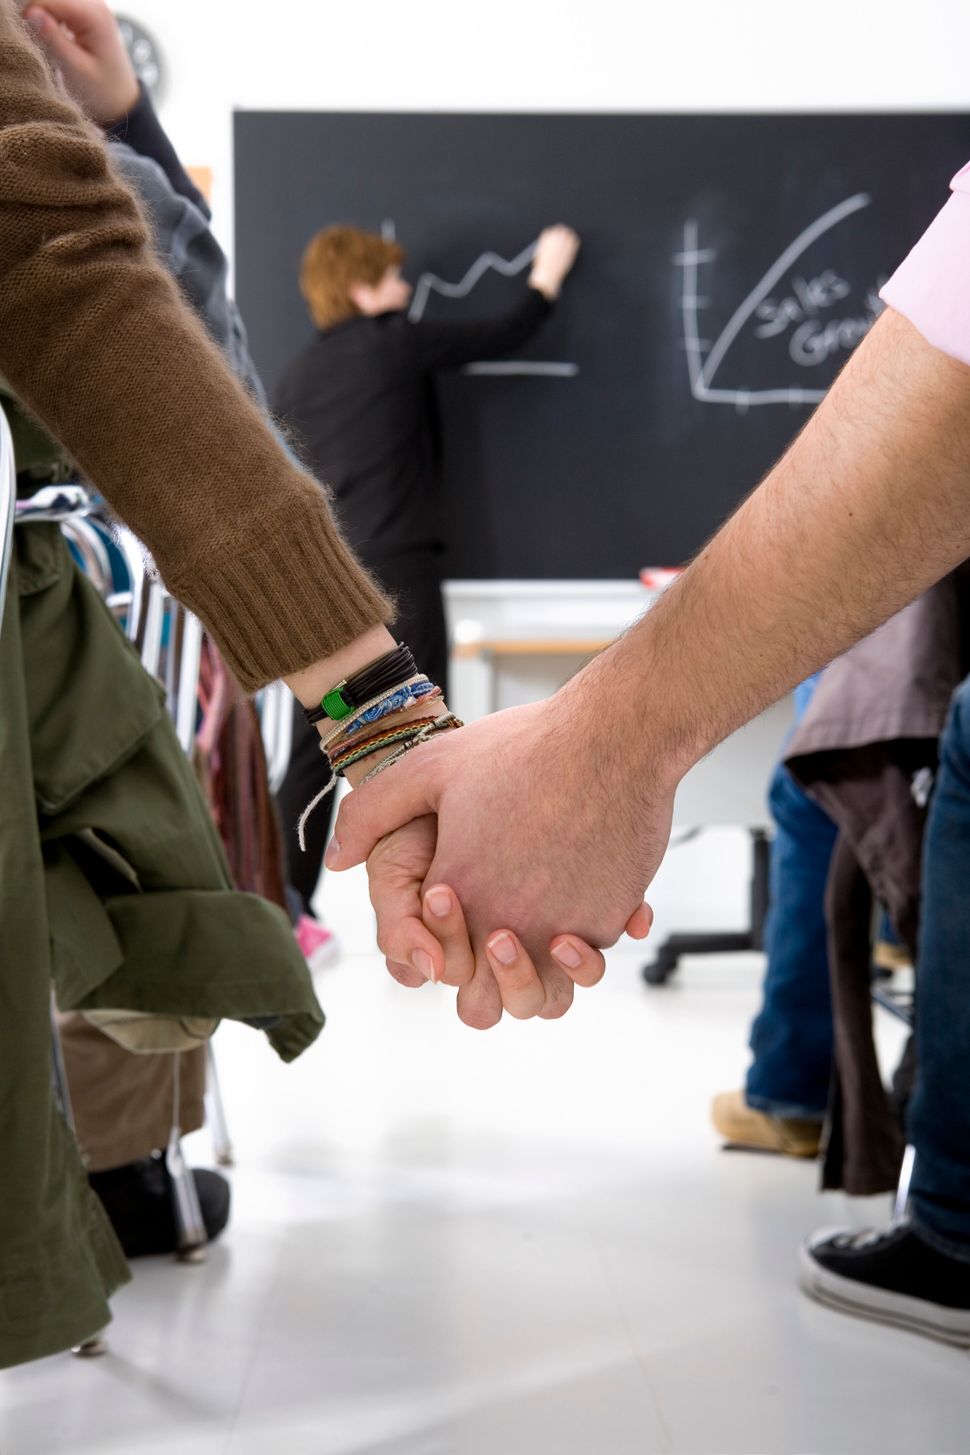 Two students hold hands in class.